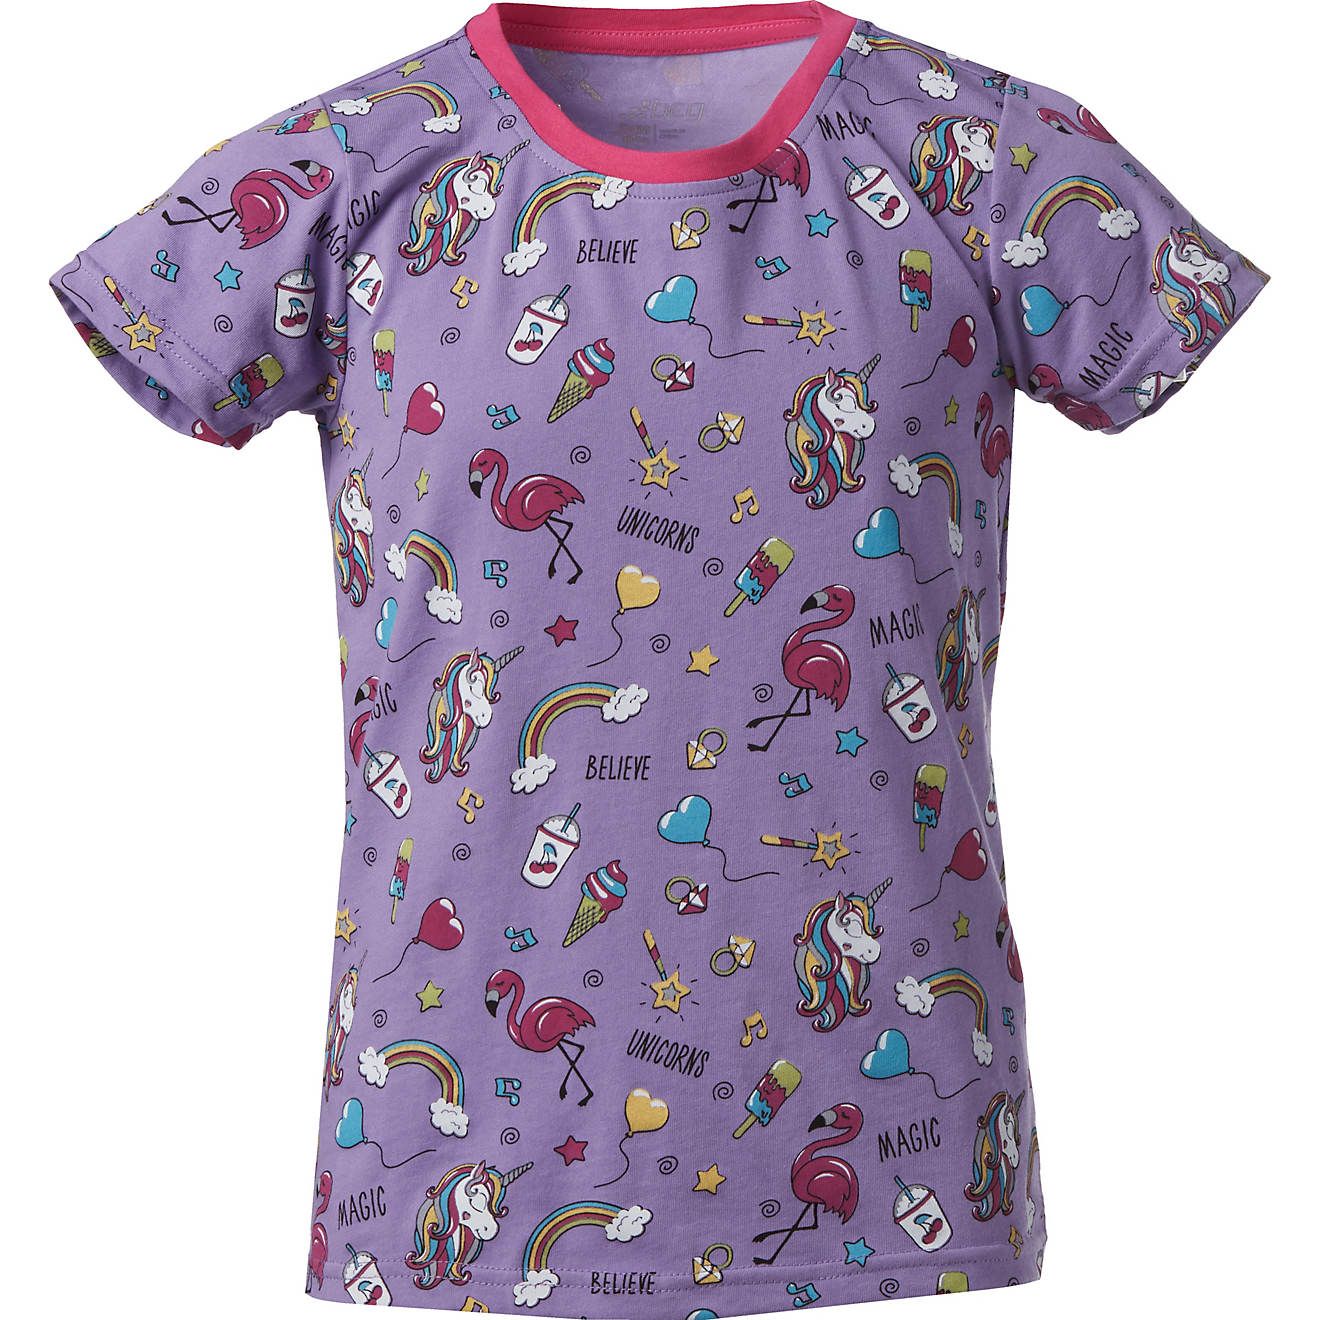 BCG Girls' Rainbow Print Graphic T-shirt | Academy Sports + Outdoor Affiliate